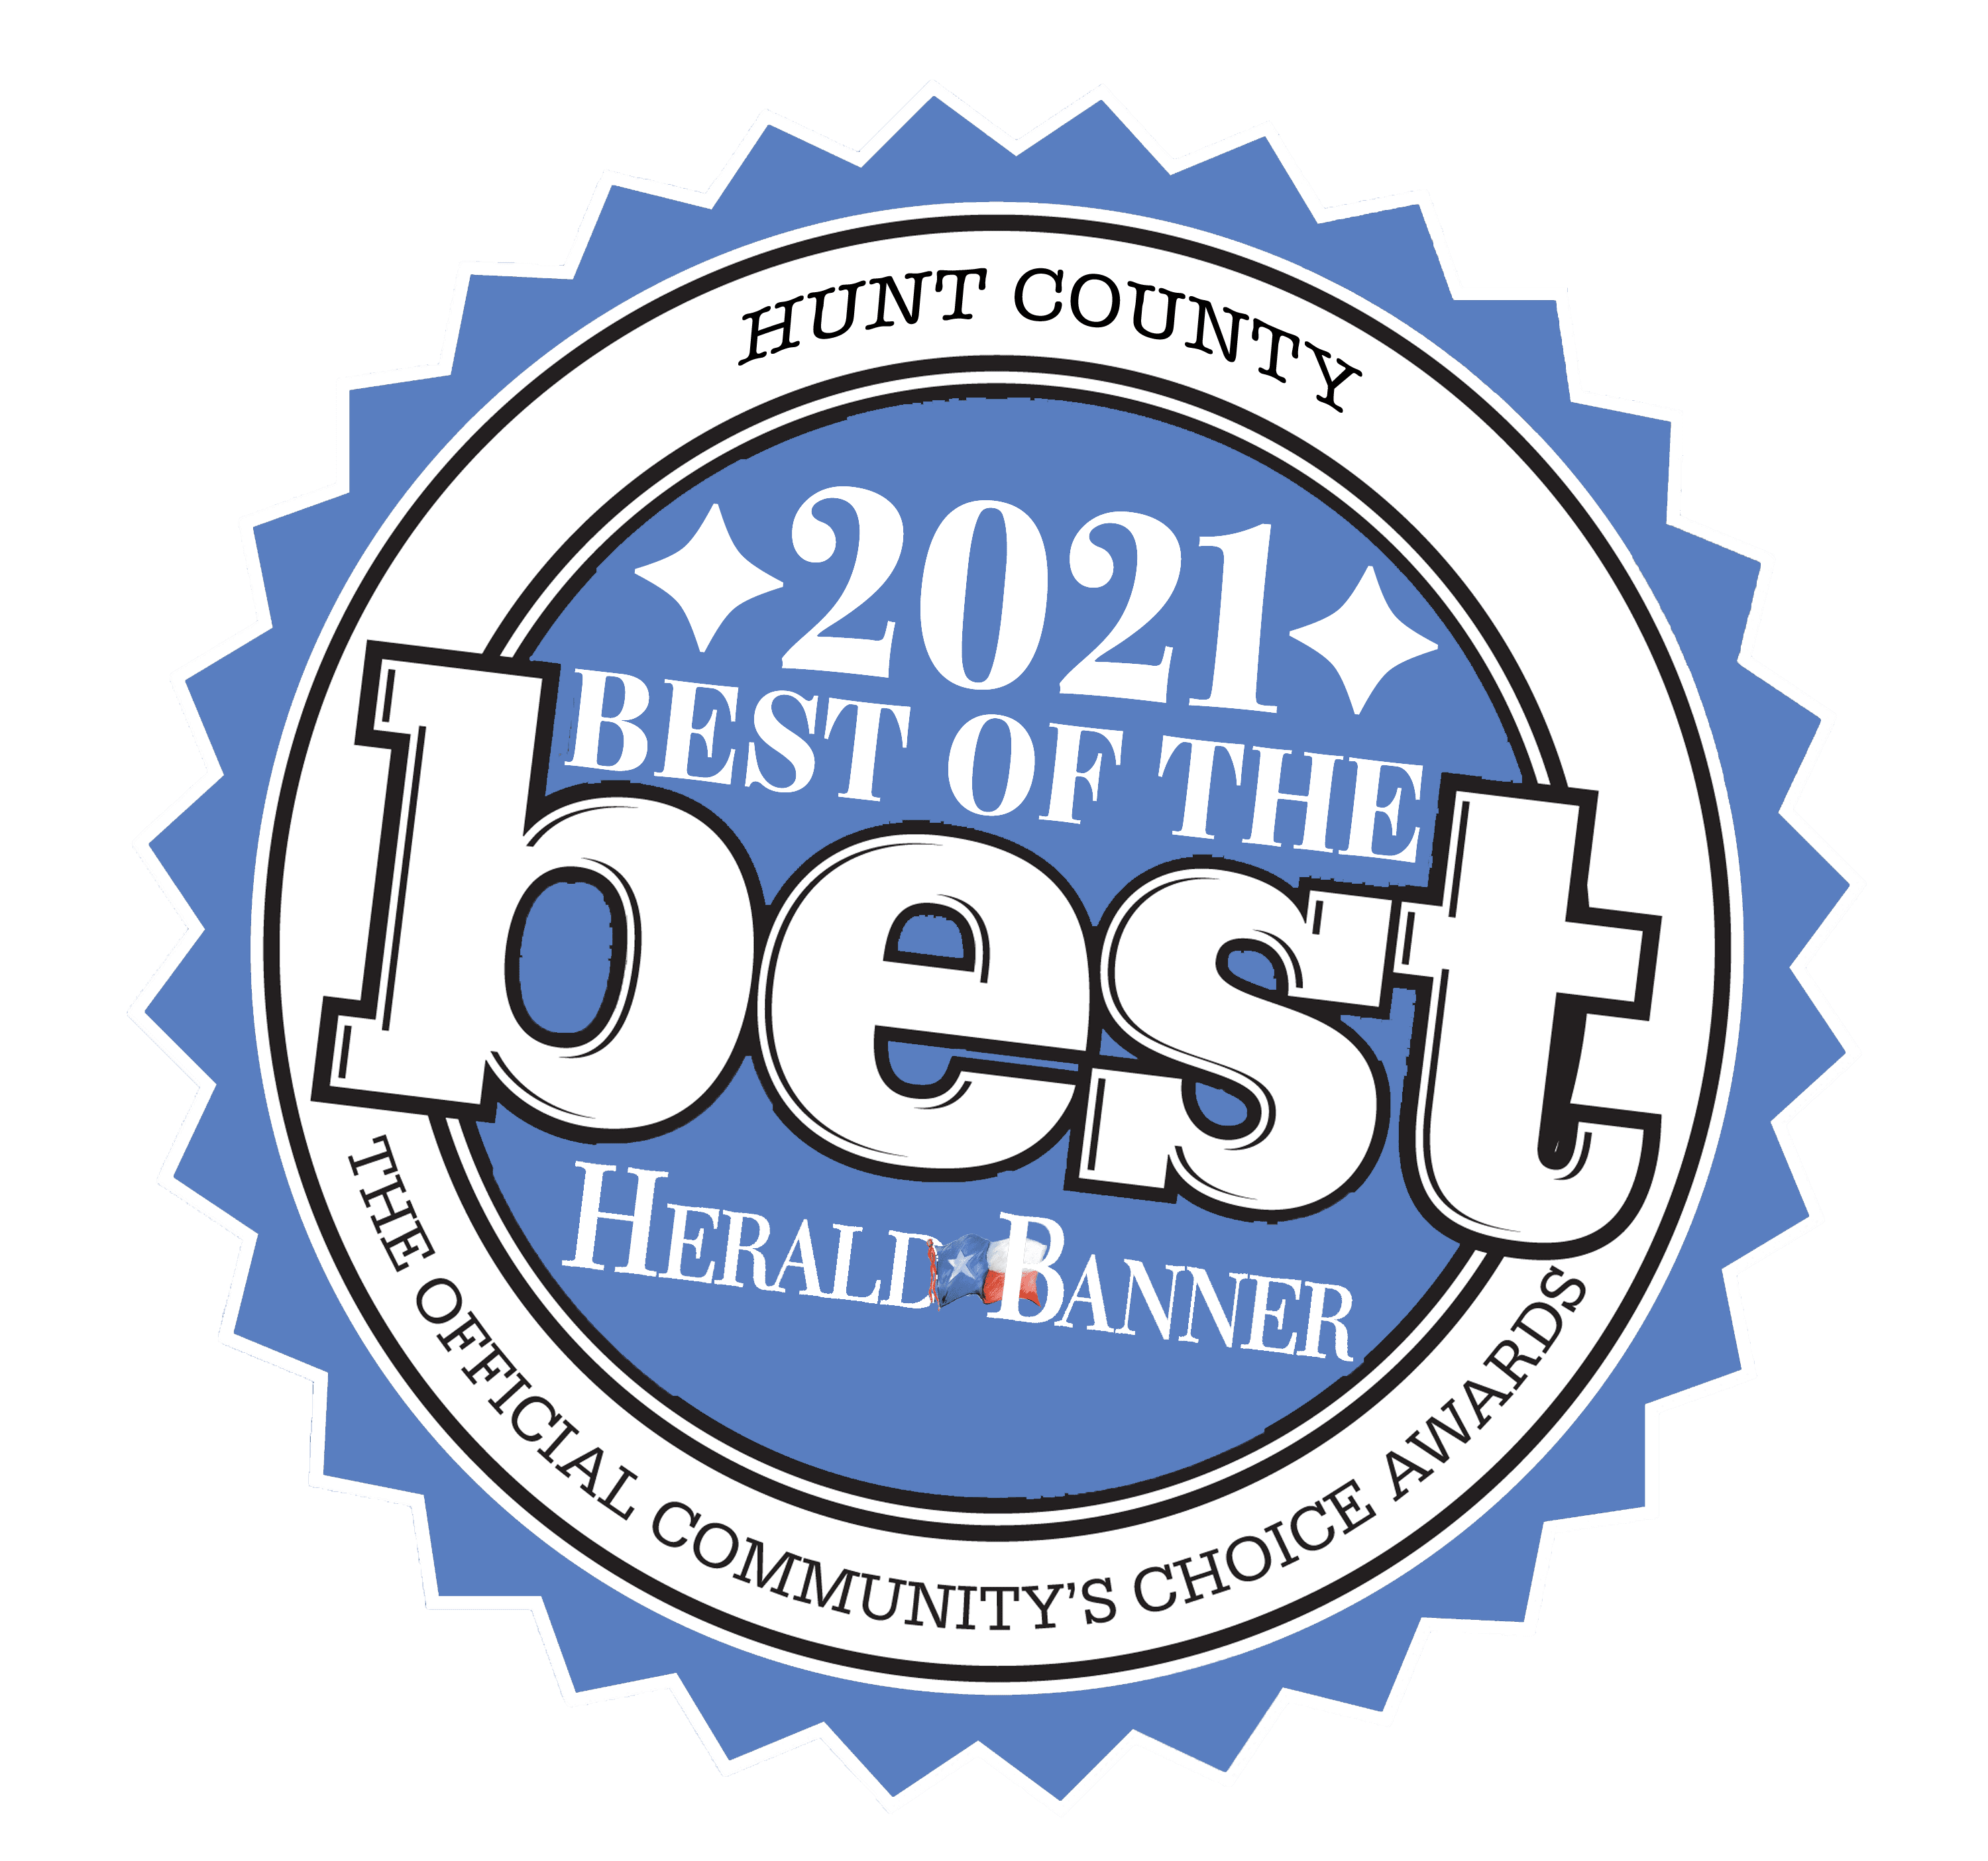 2021 Best of the Best | Herald Banner | Hunt County | The official community's choice awards